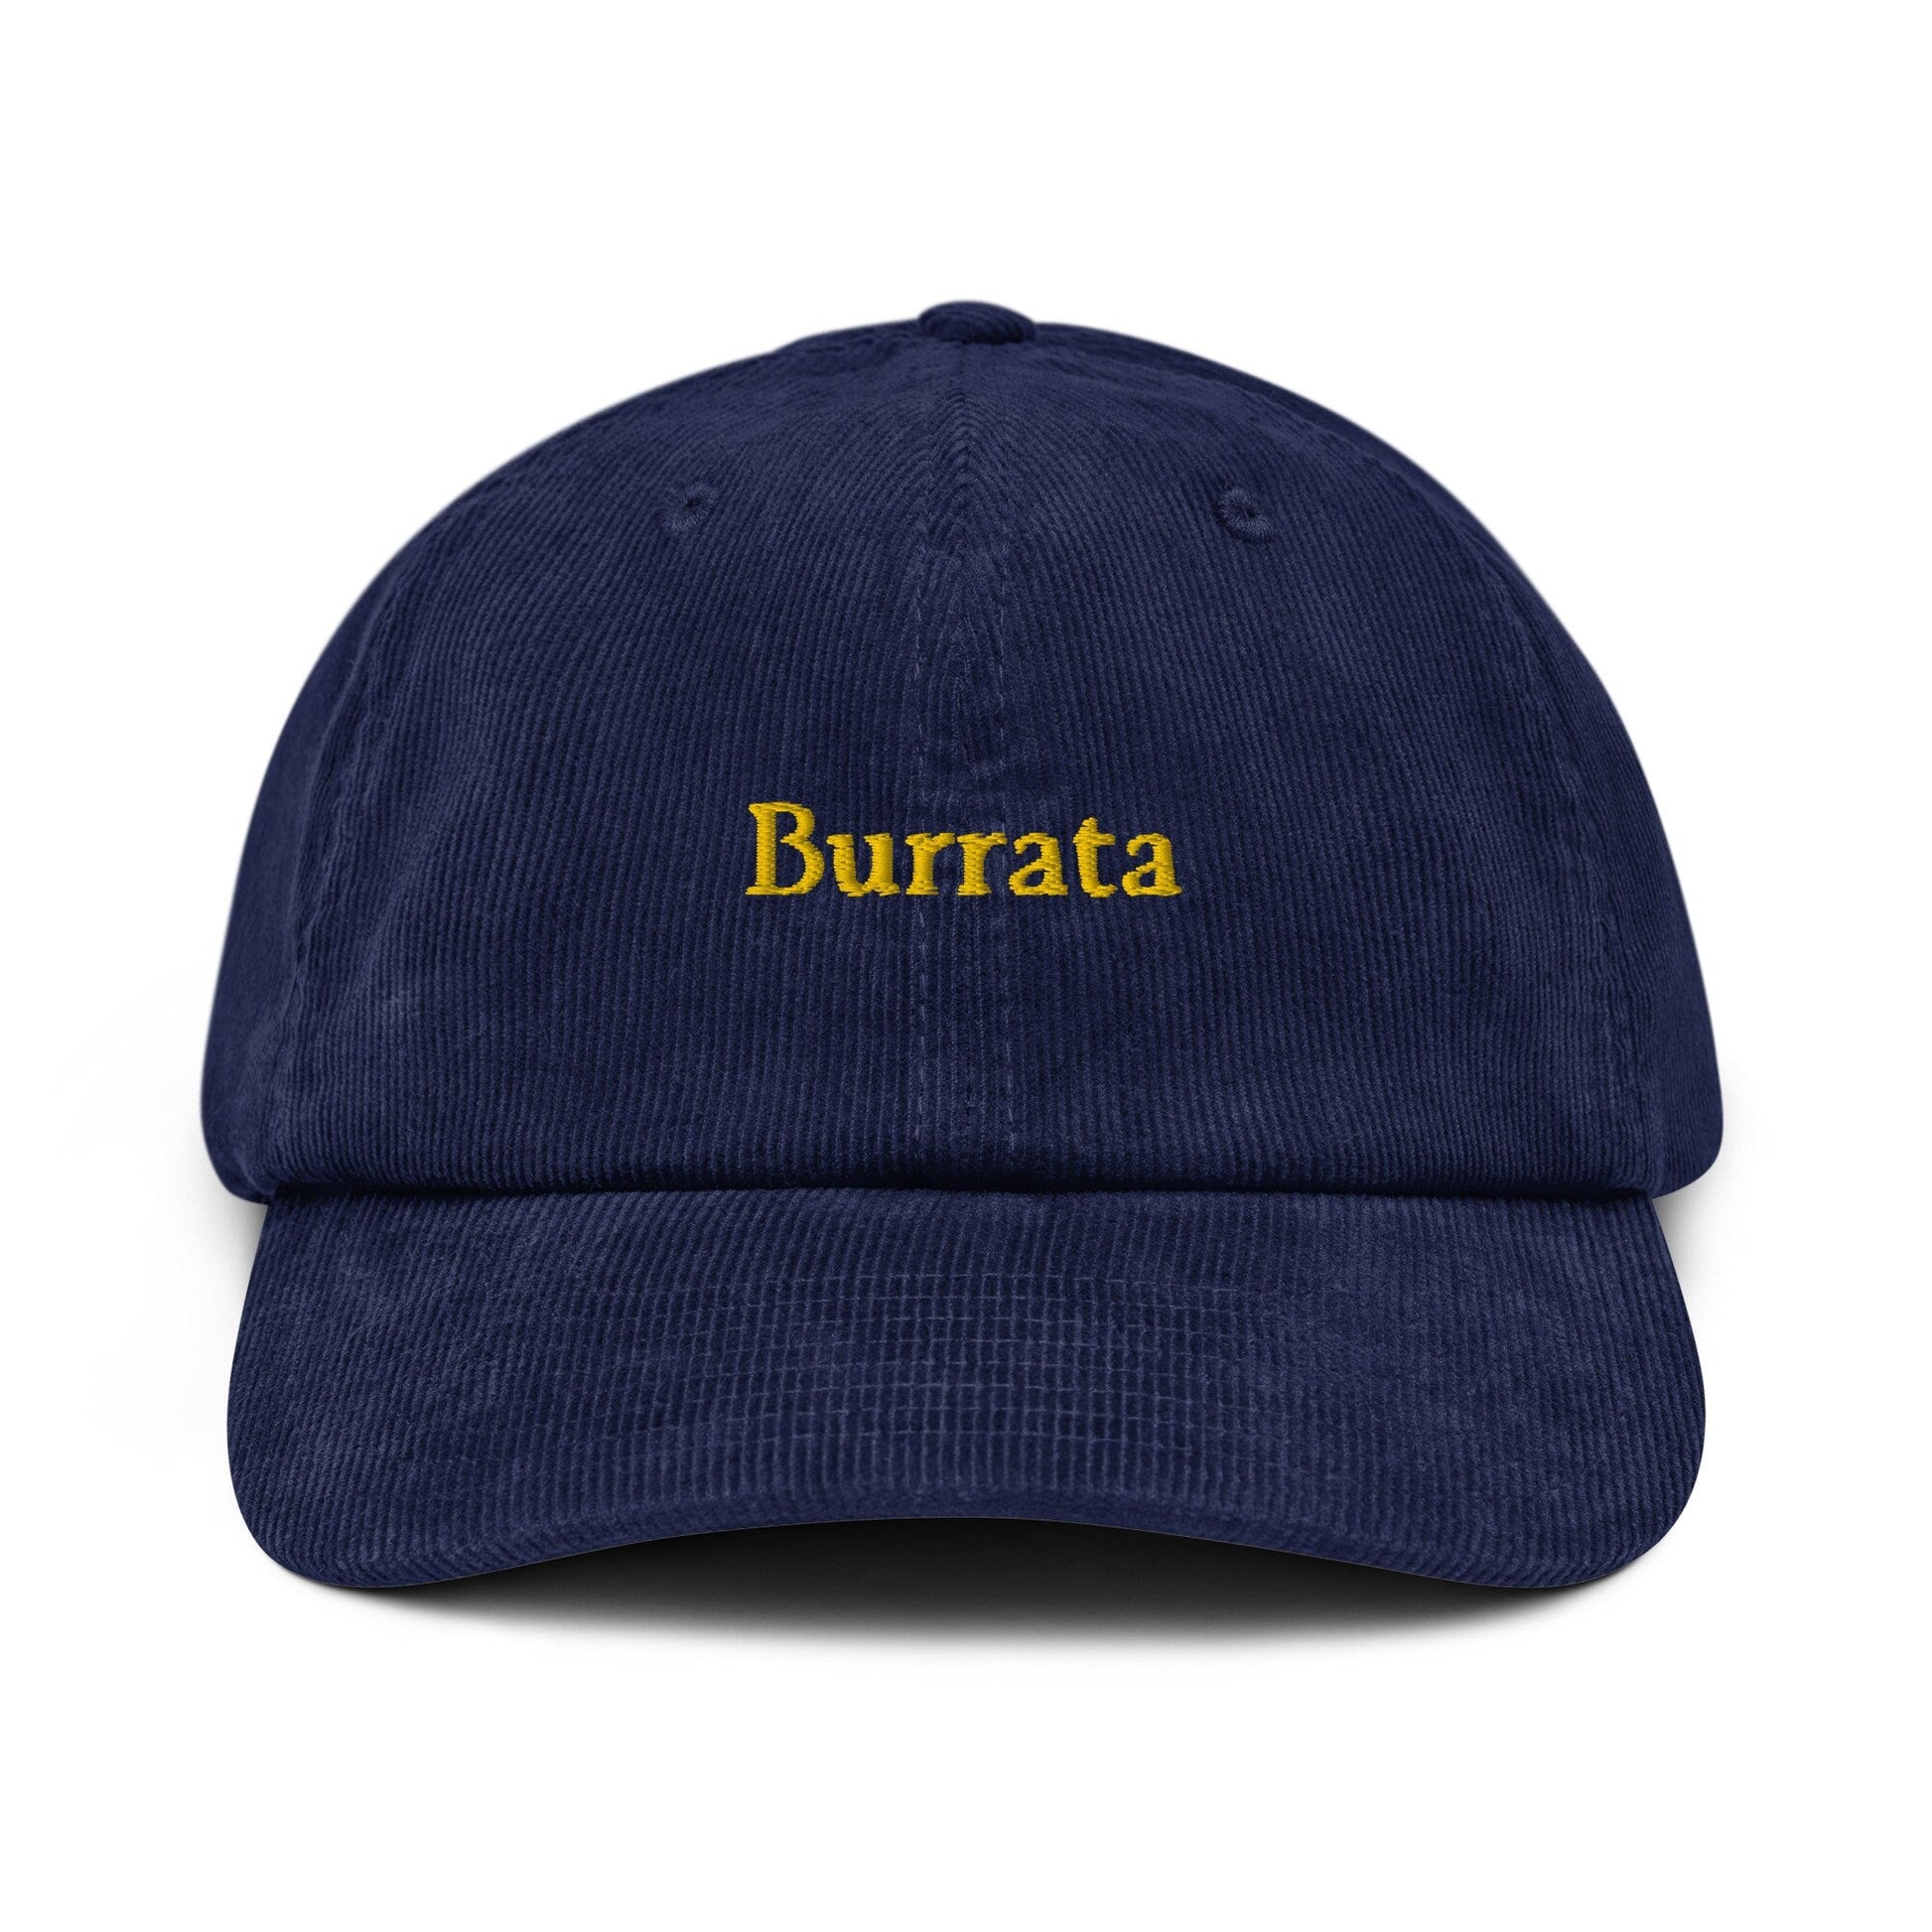 Burrata Corduroy Hat - Gift for Italian Cheese Lovers - Handmade Embroidered Cap - Evilwater Originals